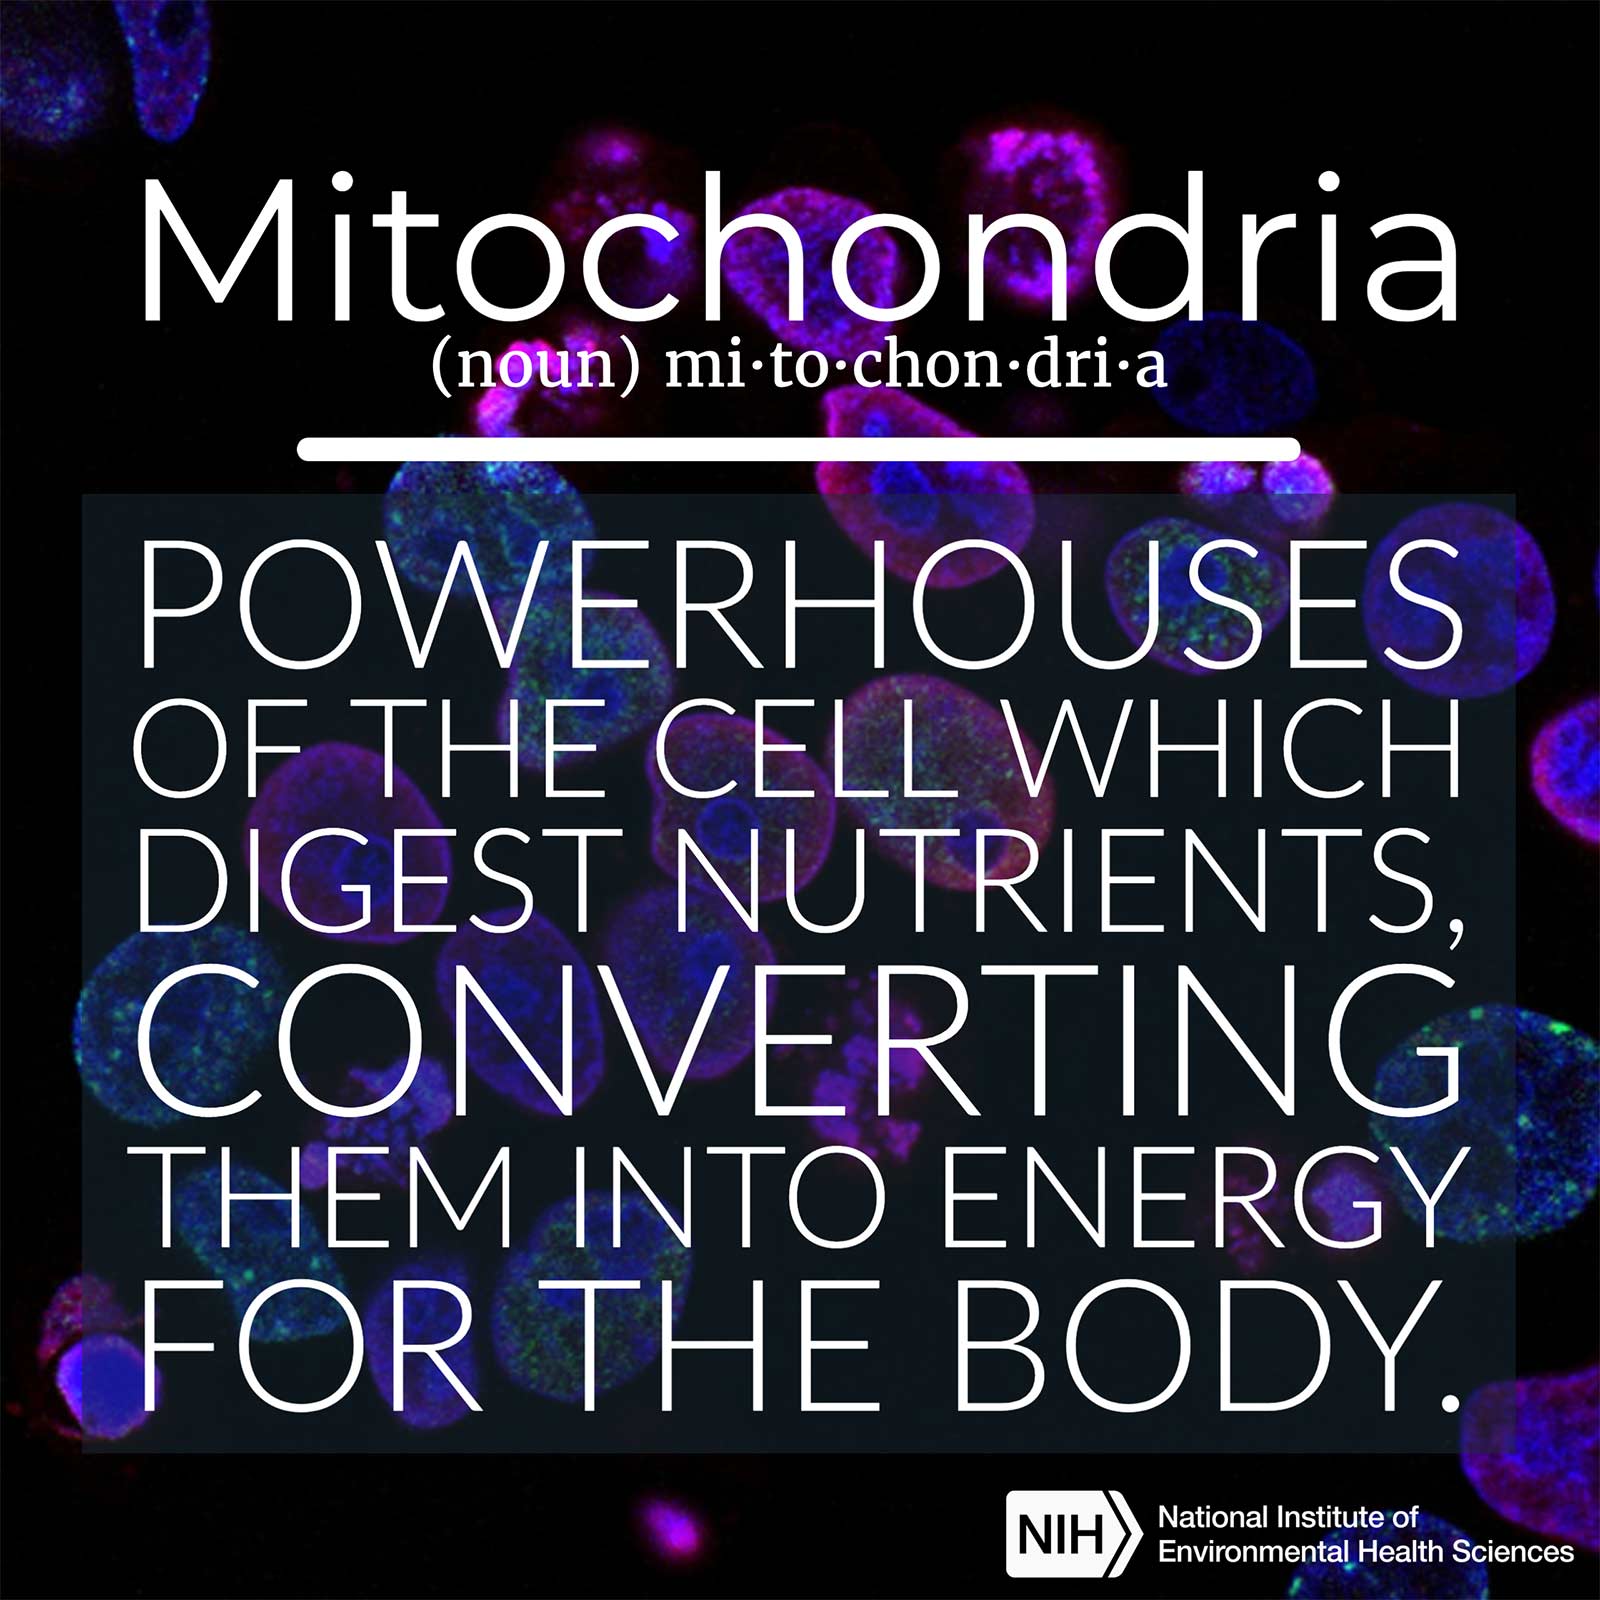 Mitochondria (noun) defined as &#39;powerhouses of the cell which digest nutrients, converting them into energy for the body.&#39;